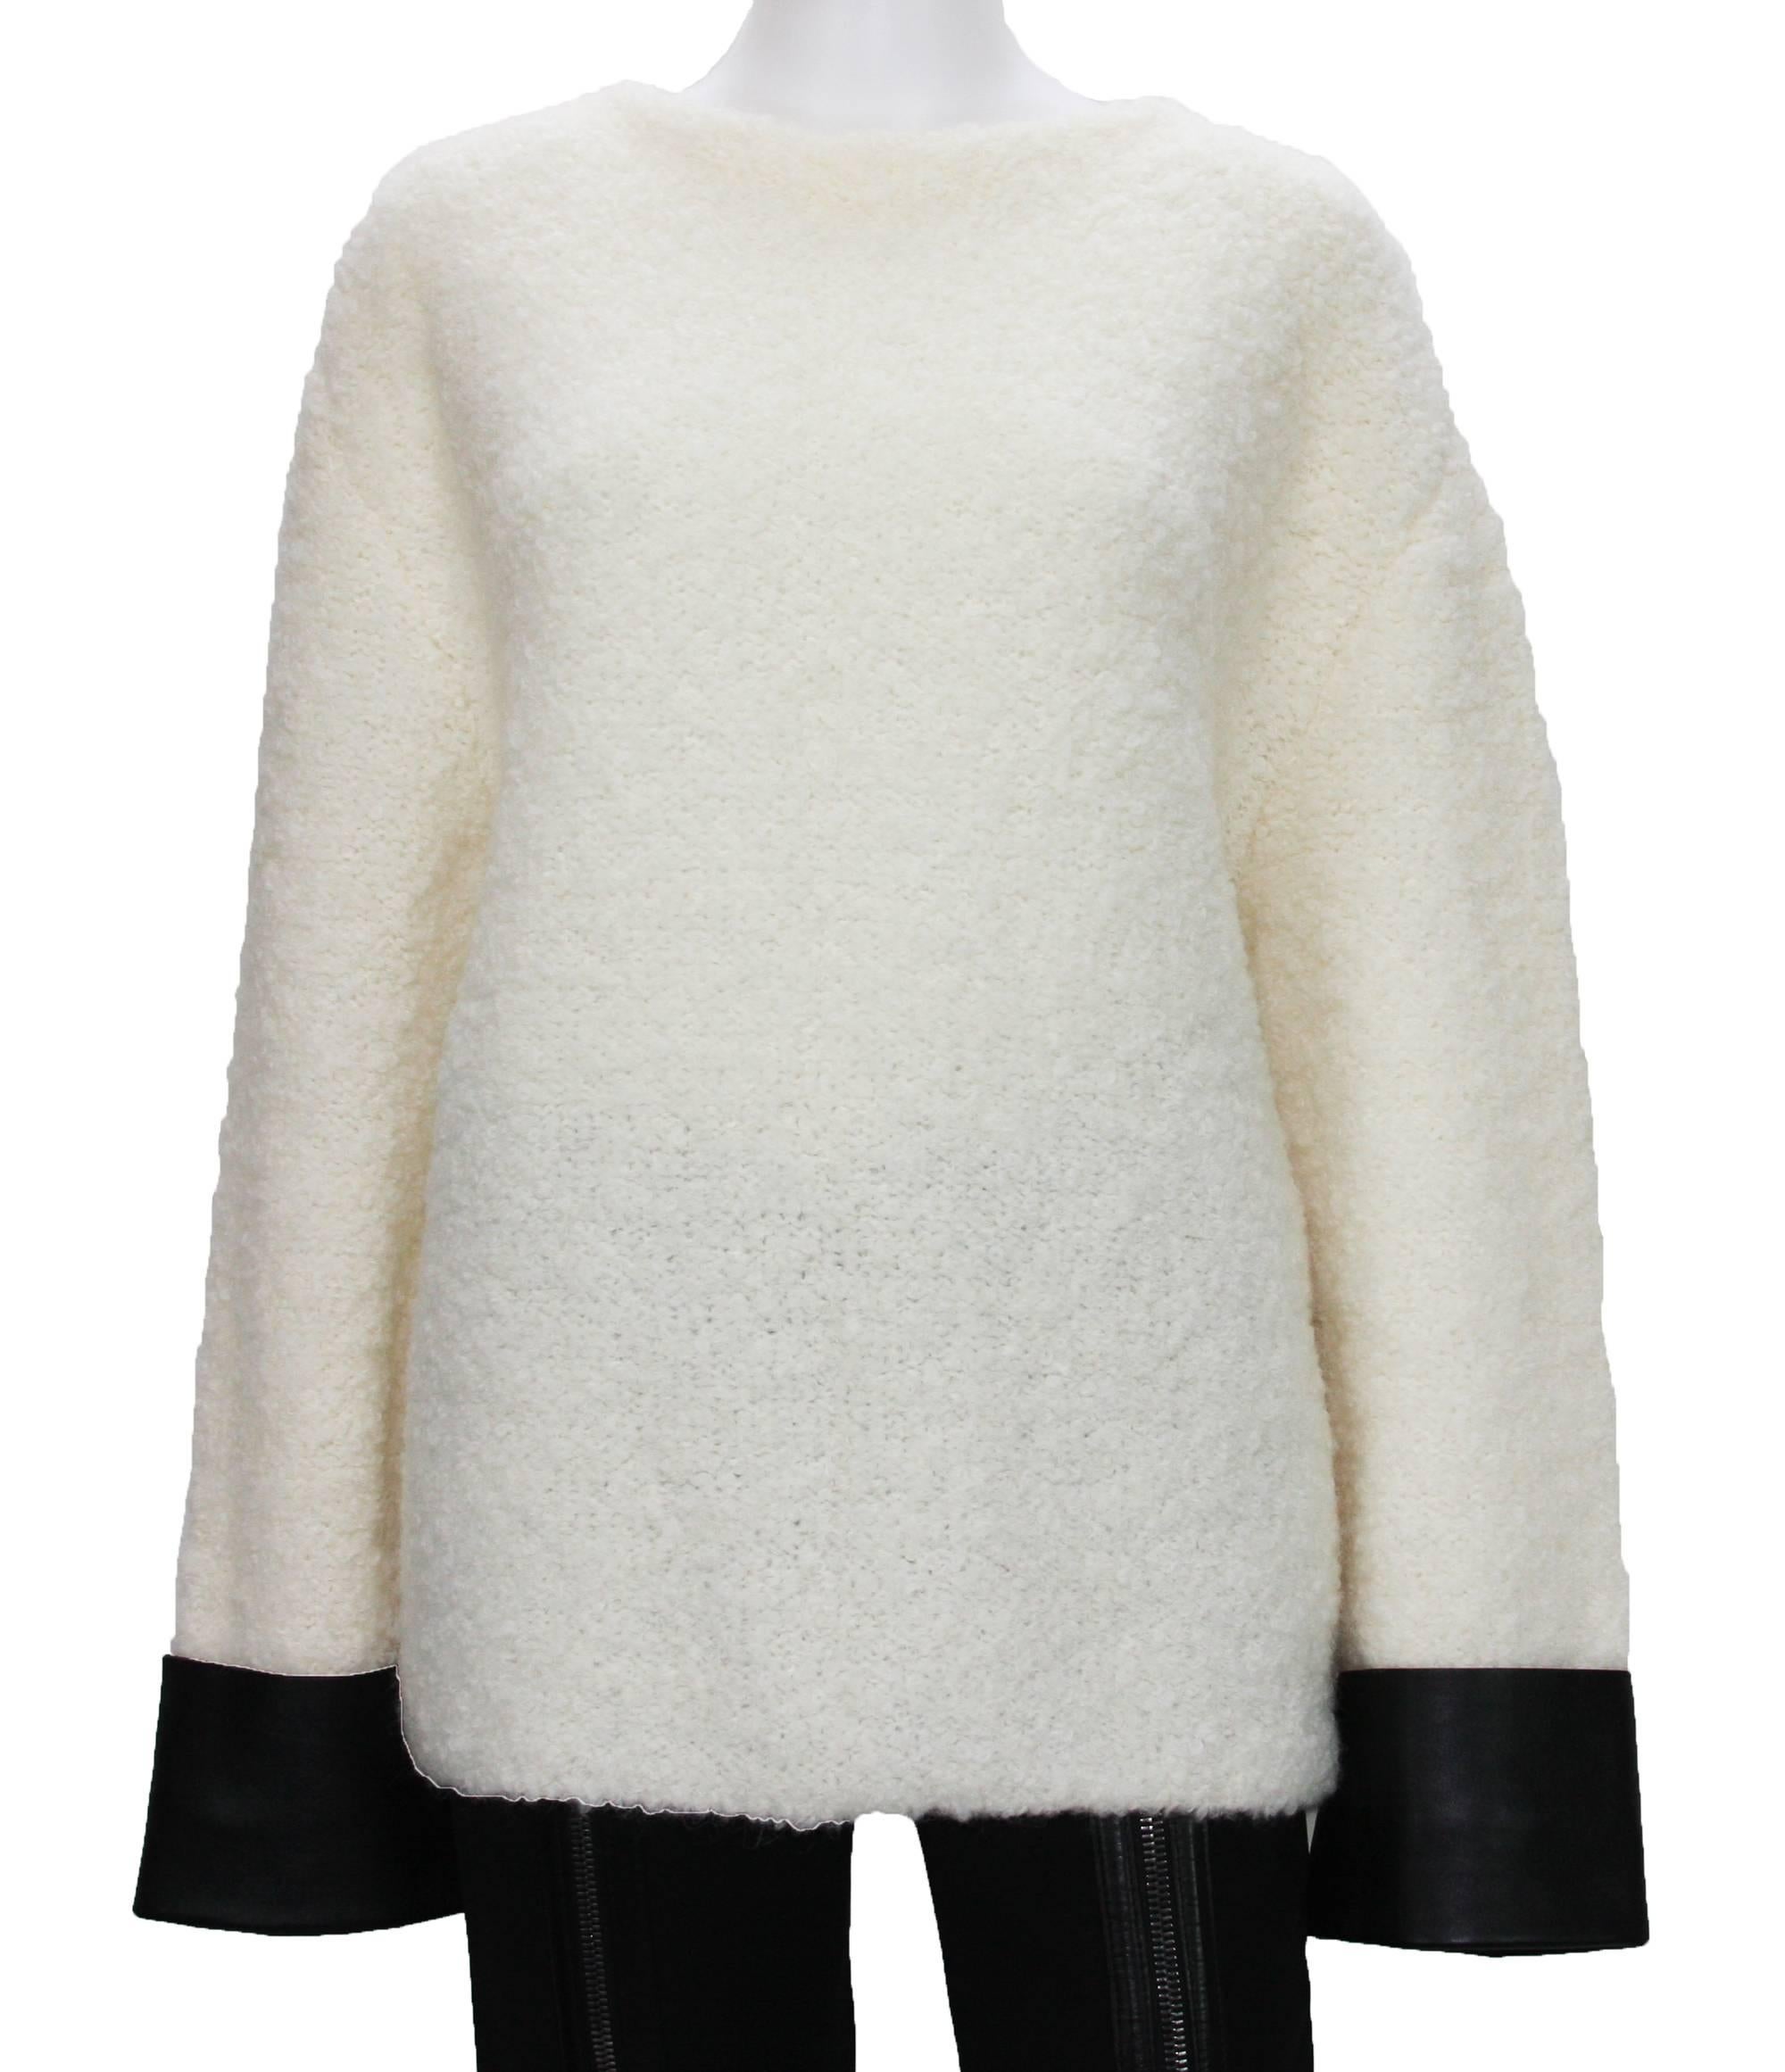 Gucci Boucle Wool Alpaca Cream Knitted Sweater w/ Leather Cuffs 1